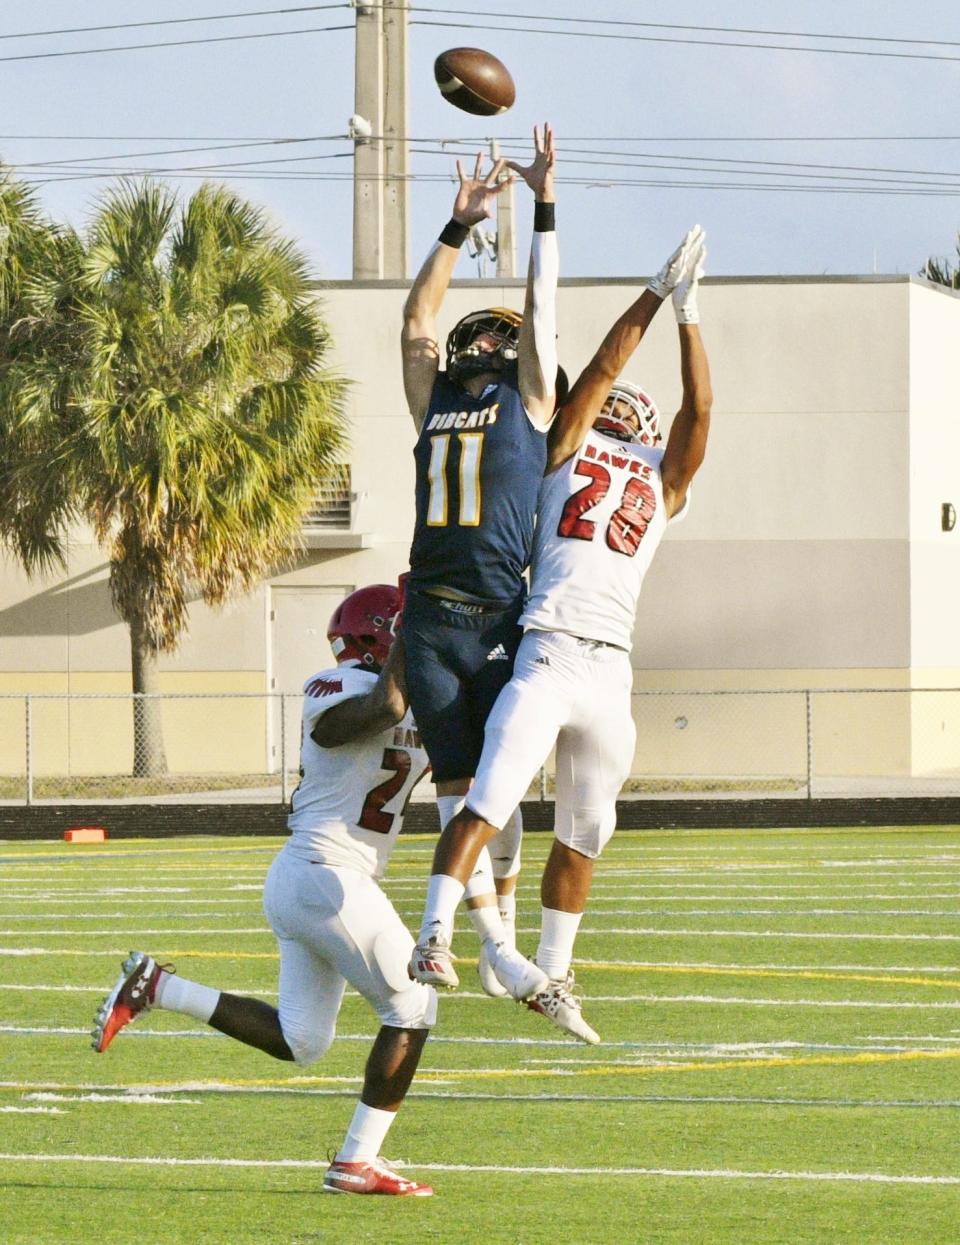 Boca Raton's Collin Bender goes up for a contested ball during last Friday's spring game against Seminole Ridge. He also caught a 67-yard touchdown pass in the contest.